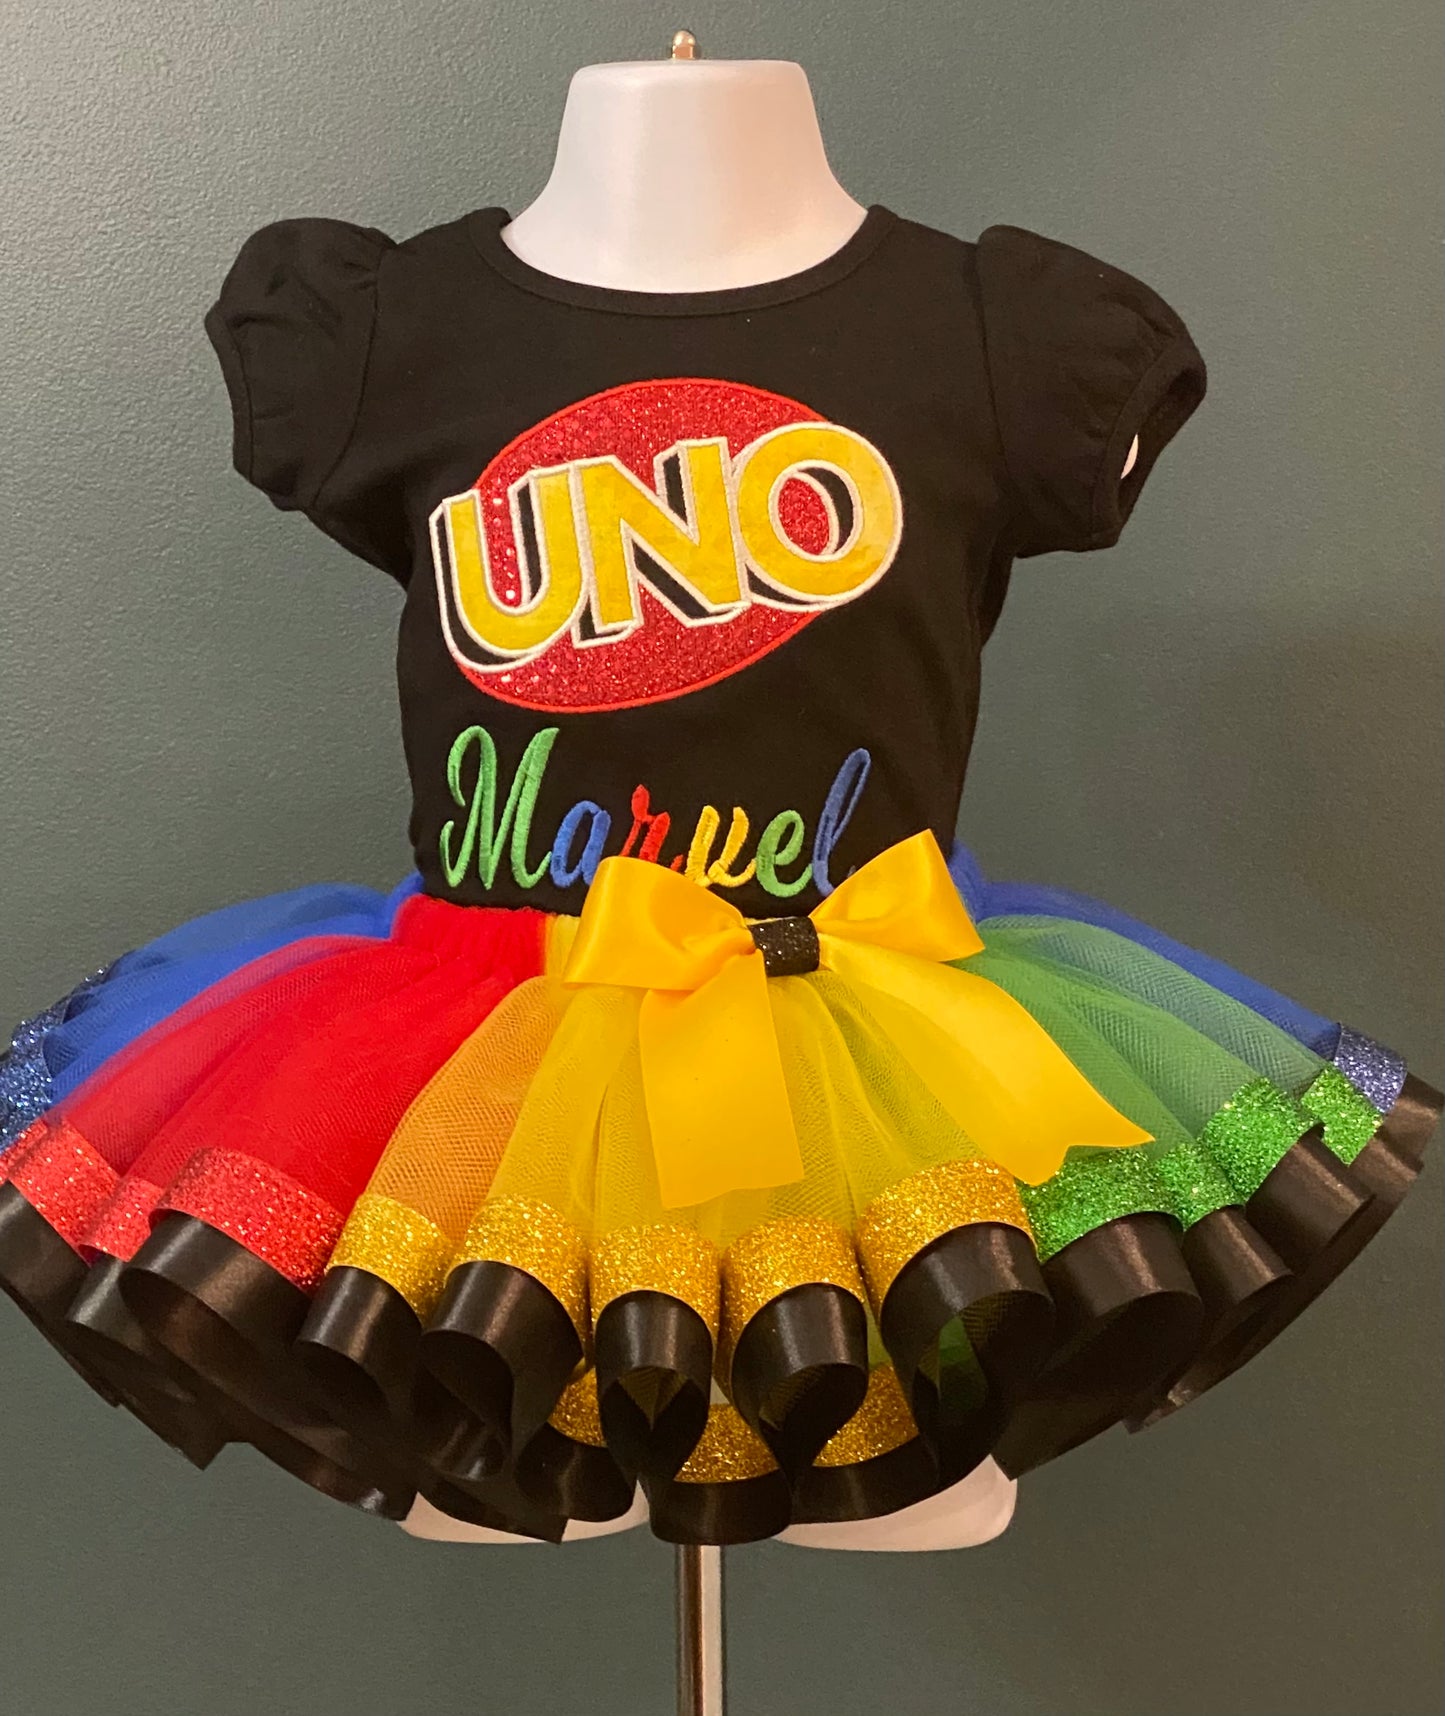 Uno birthday outfit. 1st birthday outfit for girls, theme and ideas